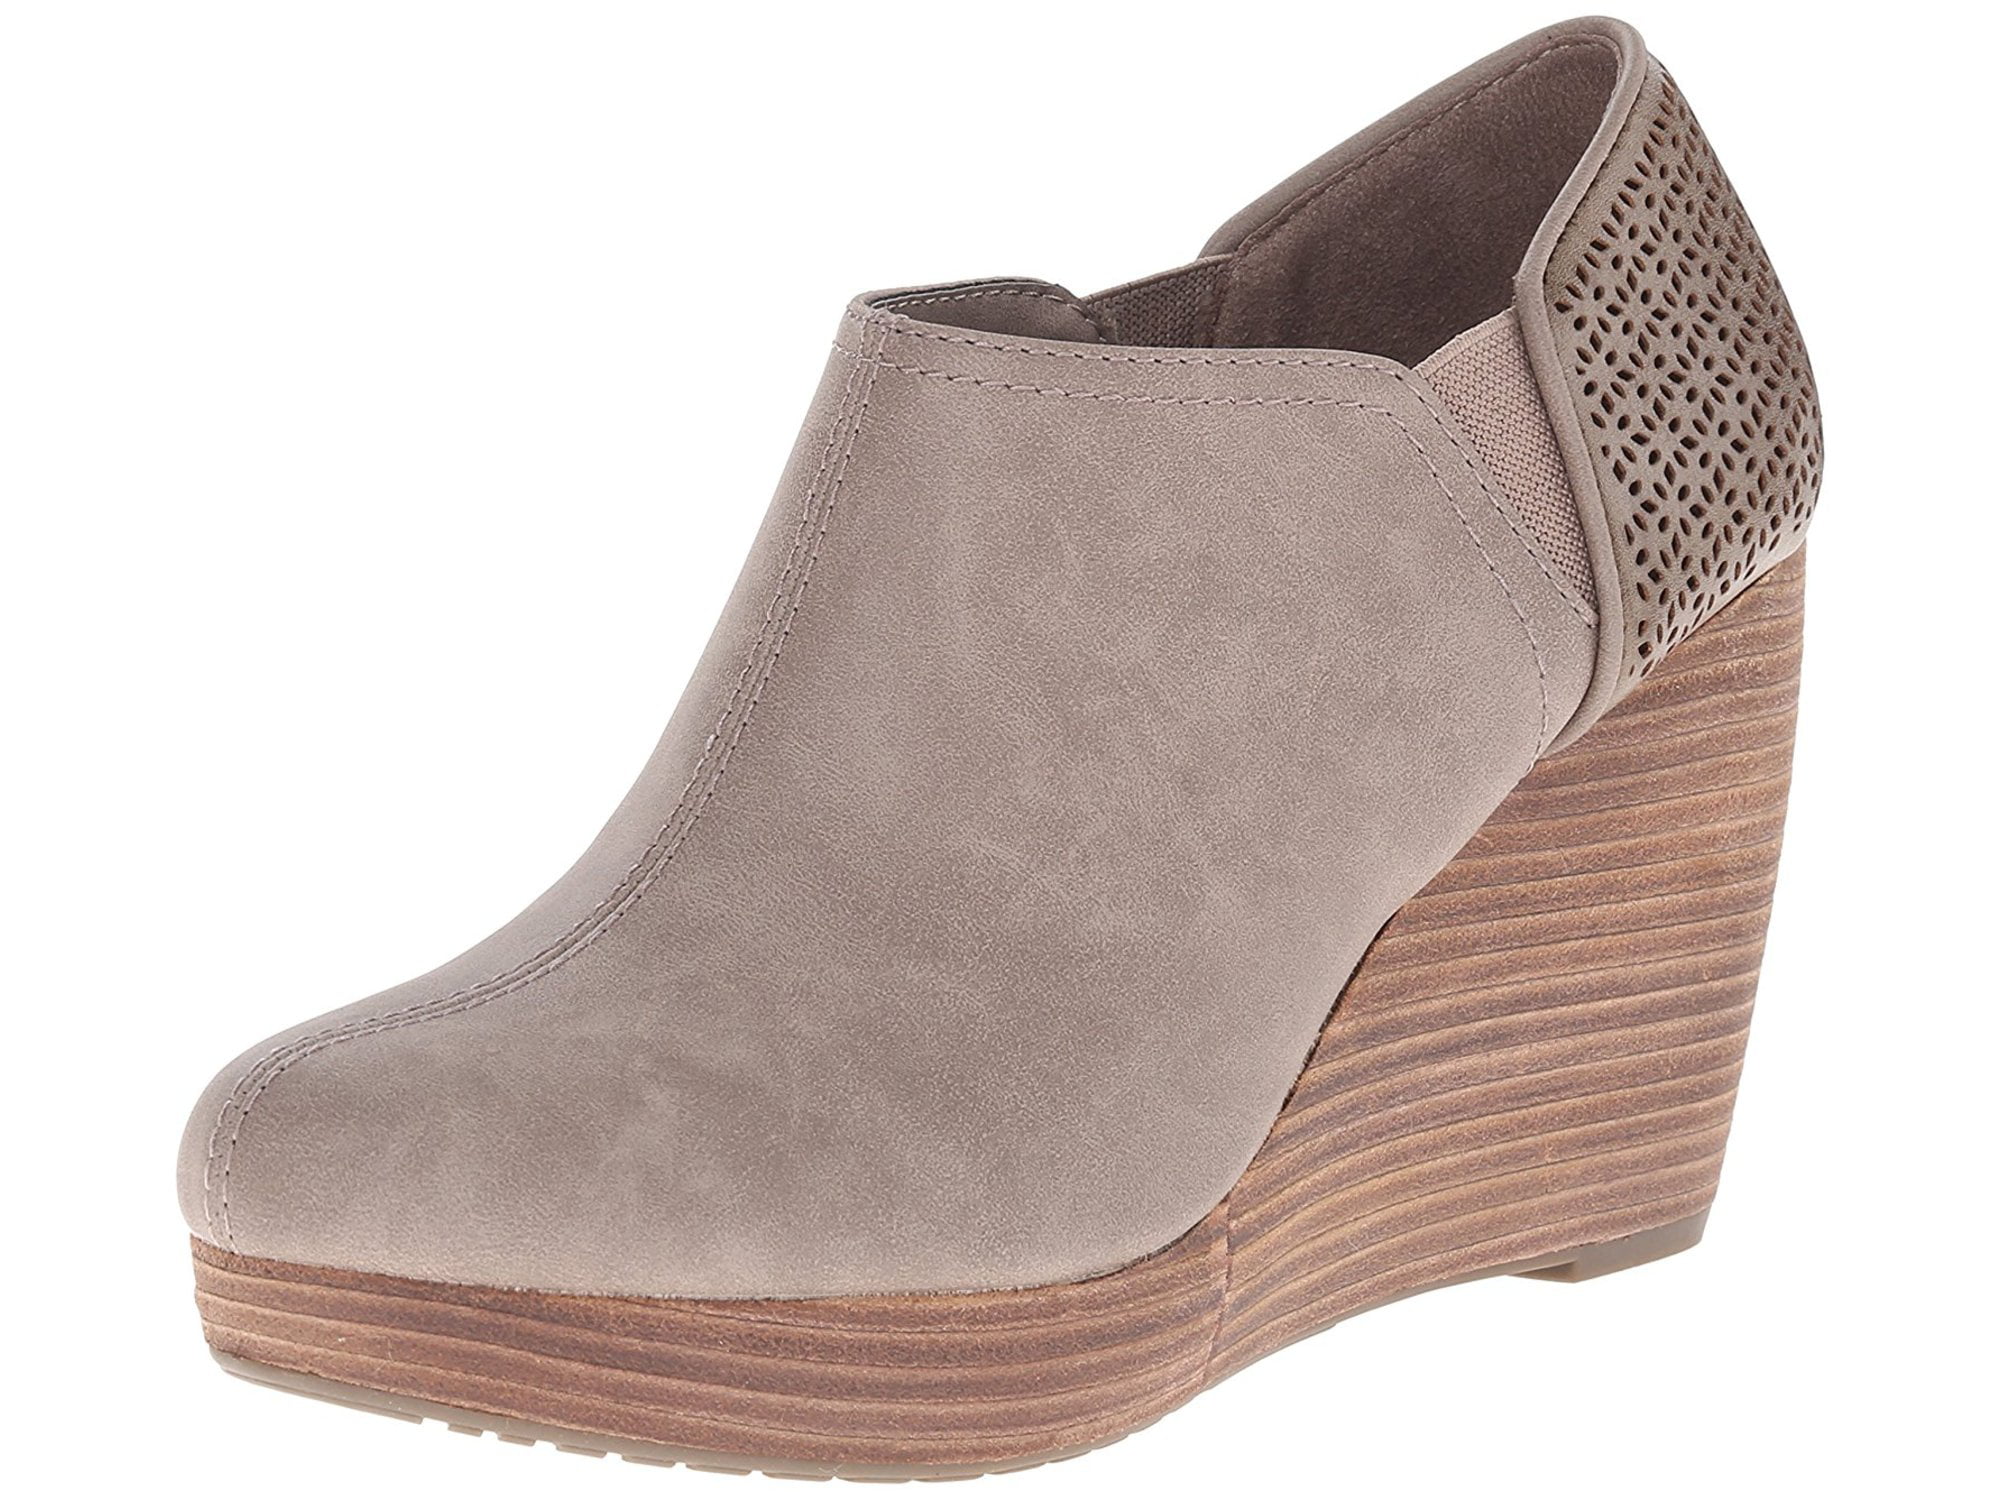 Scholl's Shoes Women's Harlow Ankle Boot Dr